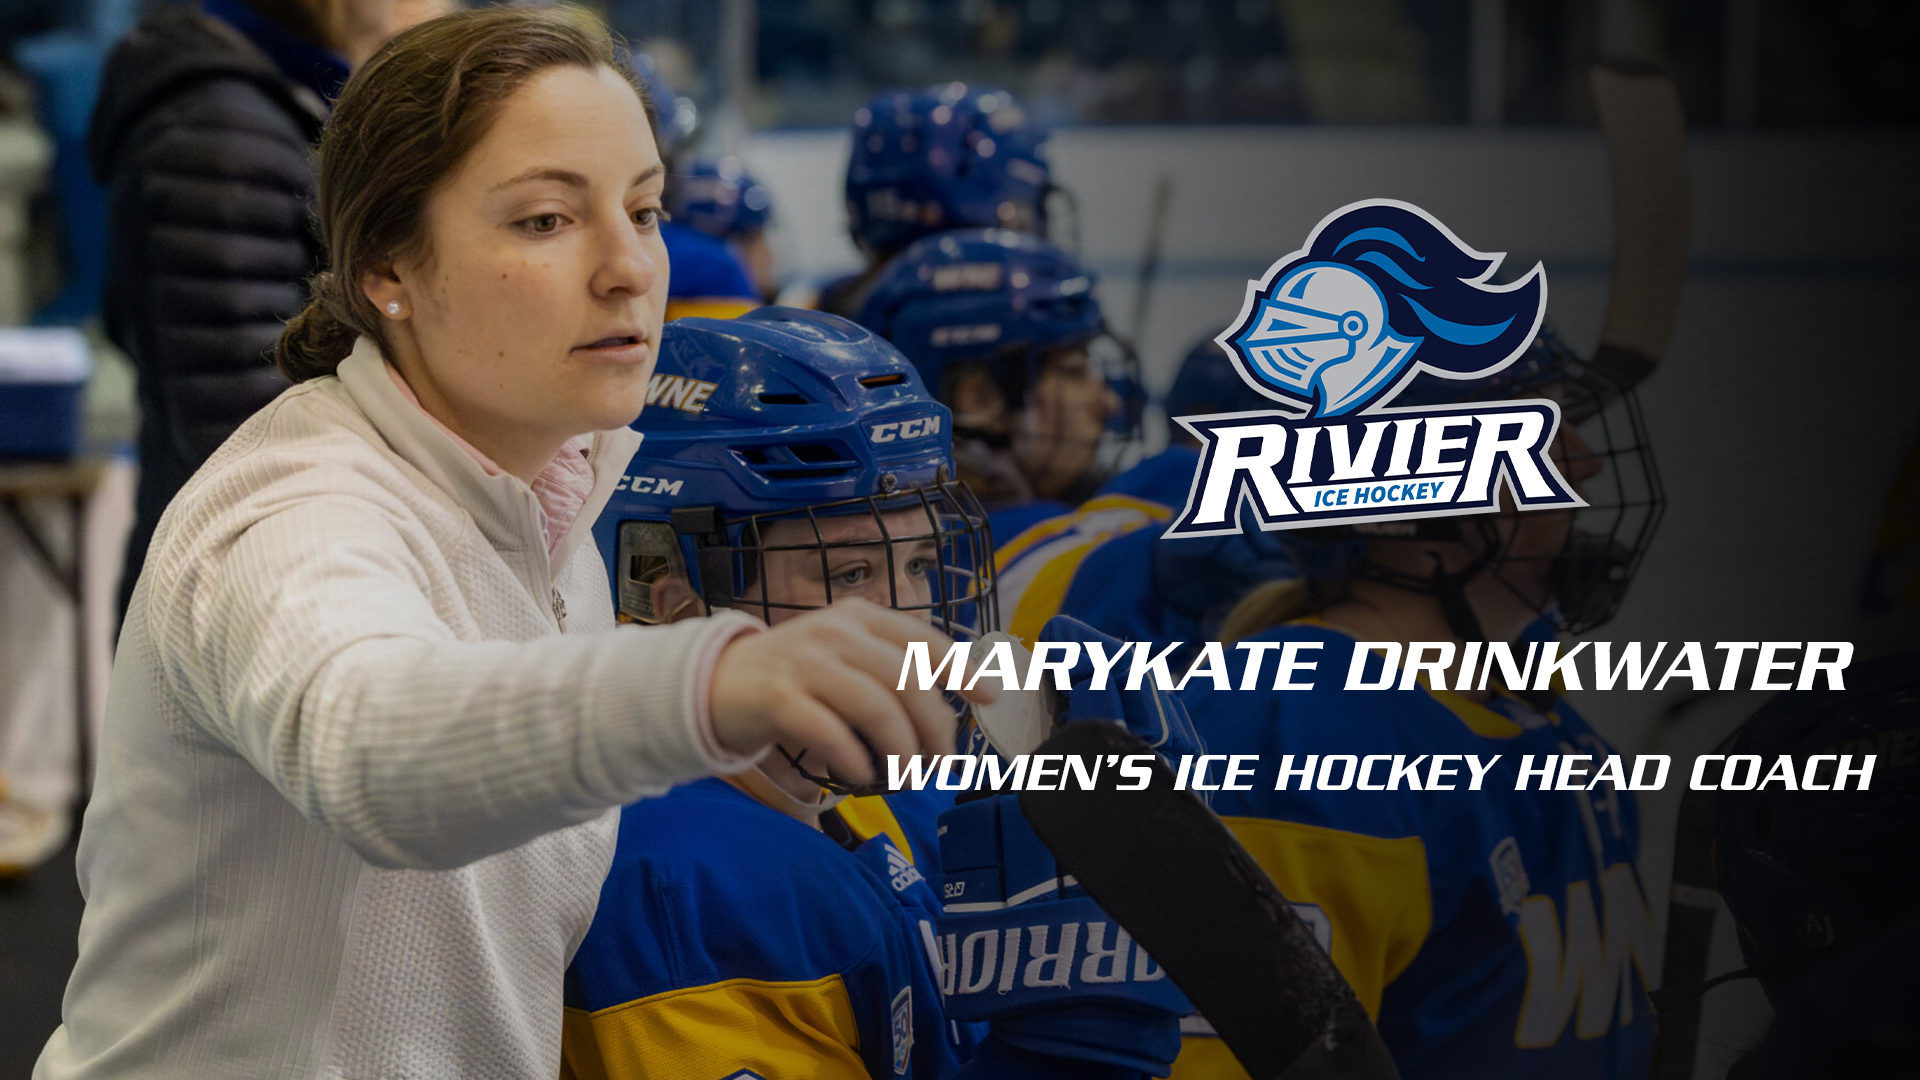 Marykate Drinkwater Named Women&rsquo;s Ice Hockey Head Coach at Rivier University